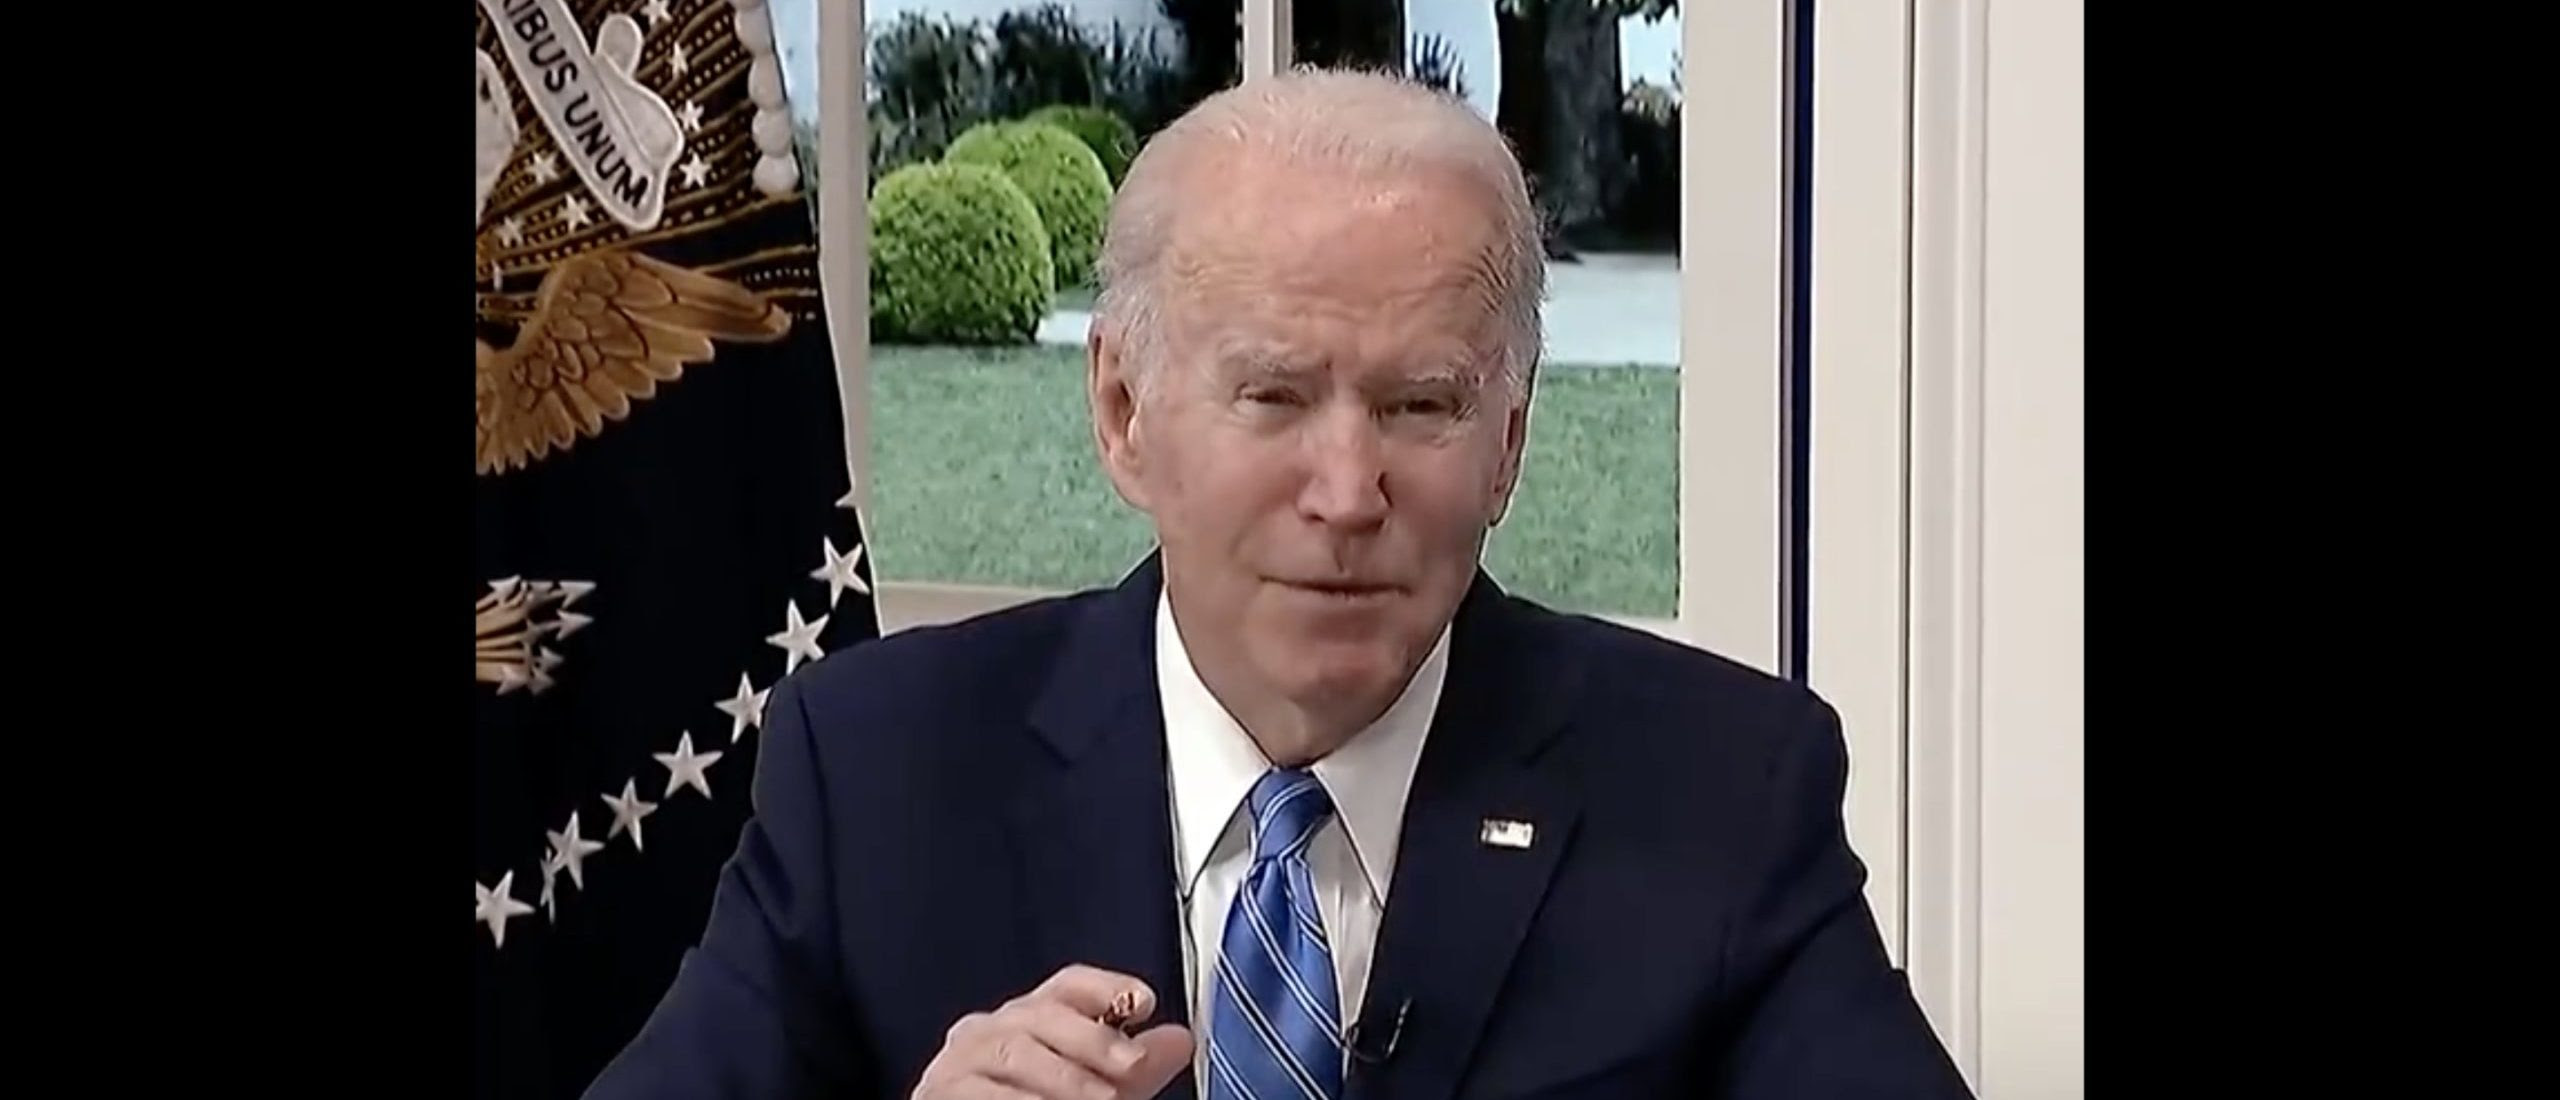 ‘This Gets Solved At The State Level’: Biden Says There’s No ‘Federal Solution’ For COVID